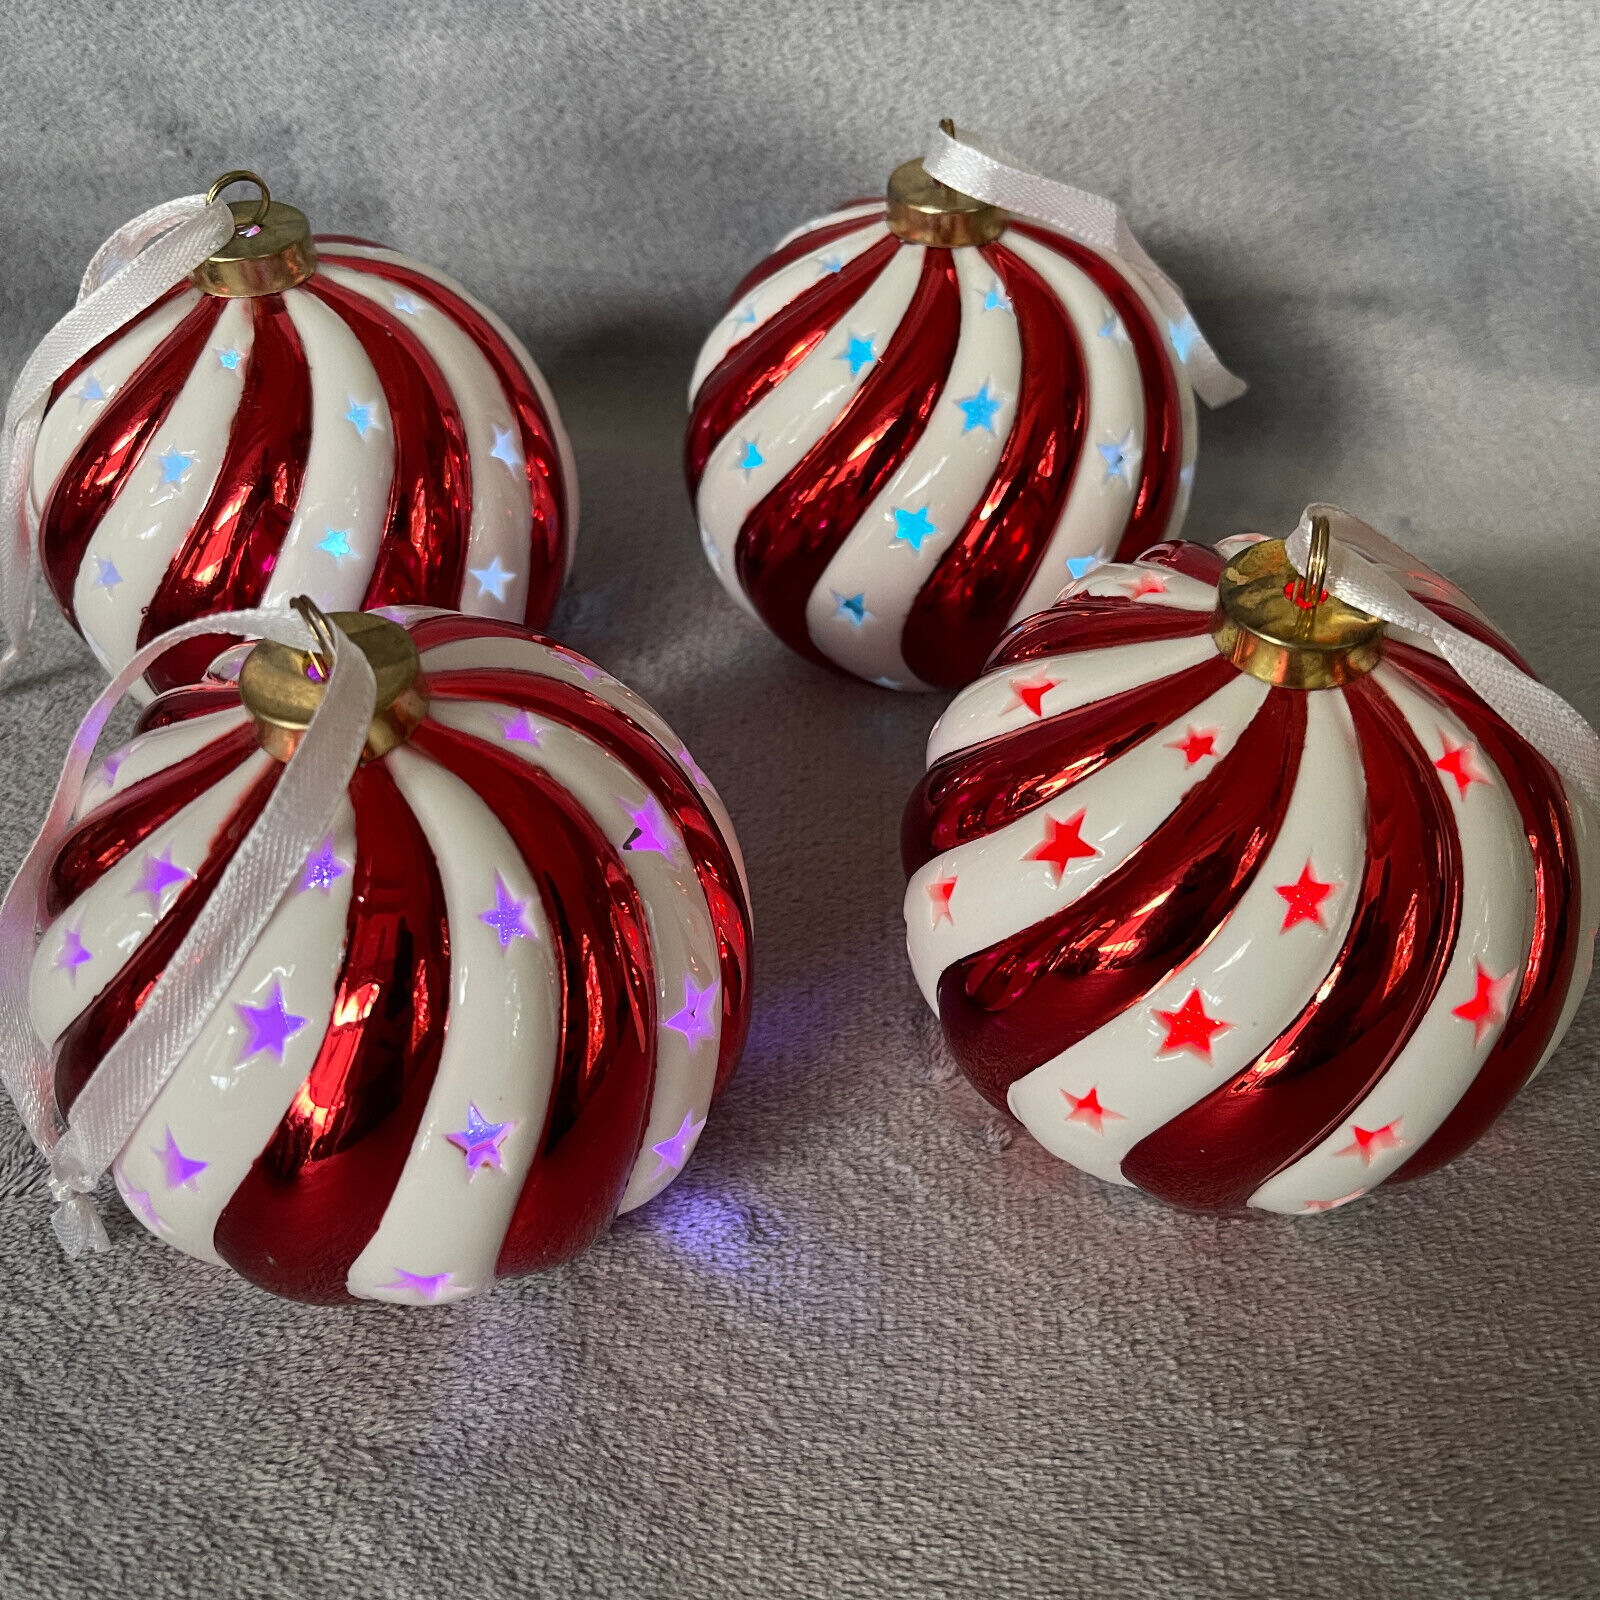 Set of 4 Flameless Multi Color Changing Light Up Holiday Ornament Balls Red